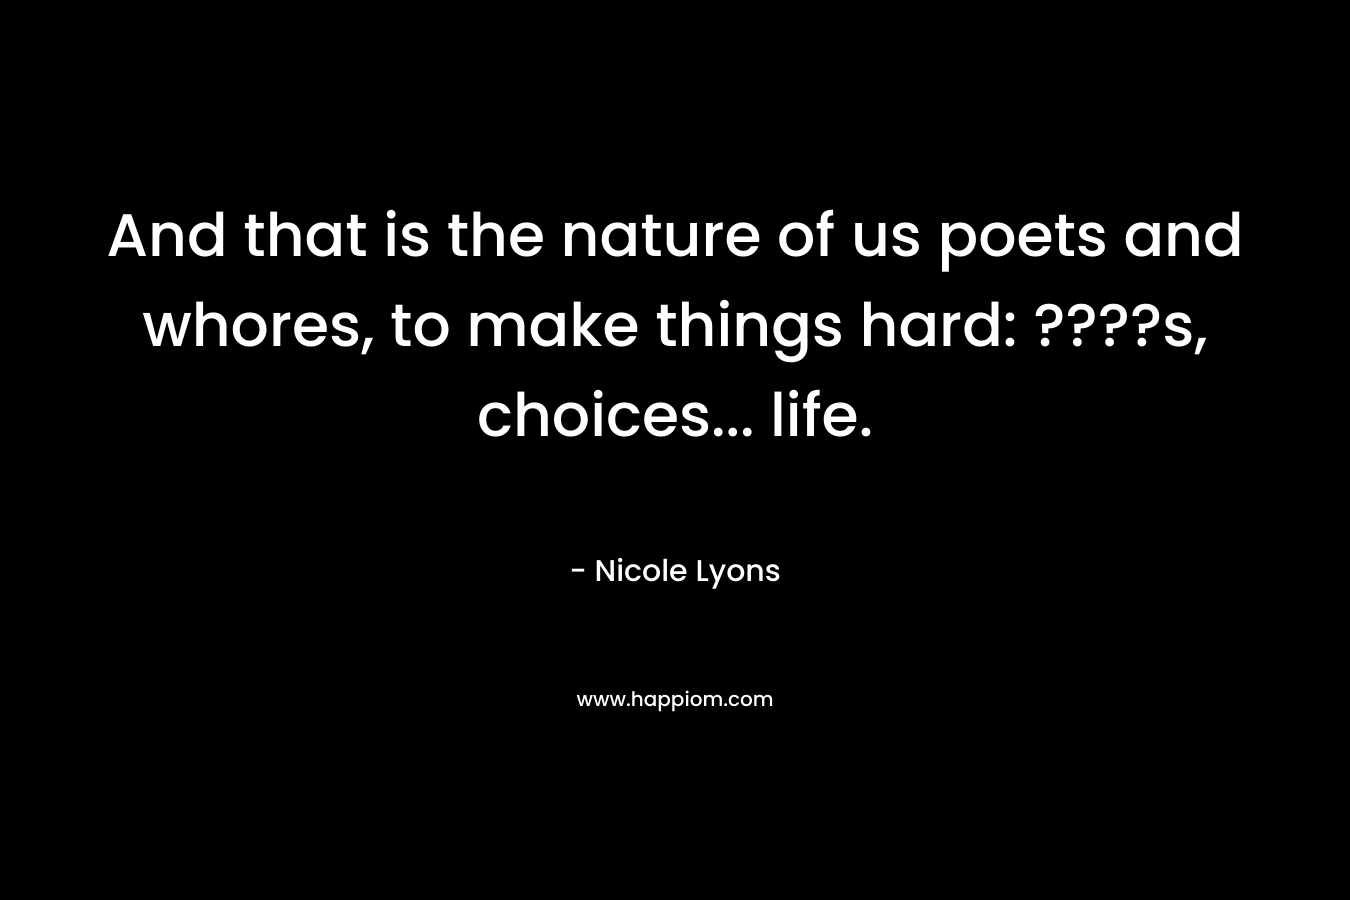 And that is the nature of us poets and whores, to make things hard: ????s, choices... life.